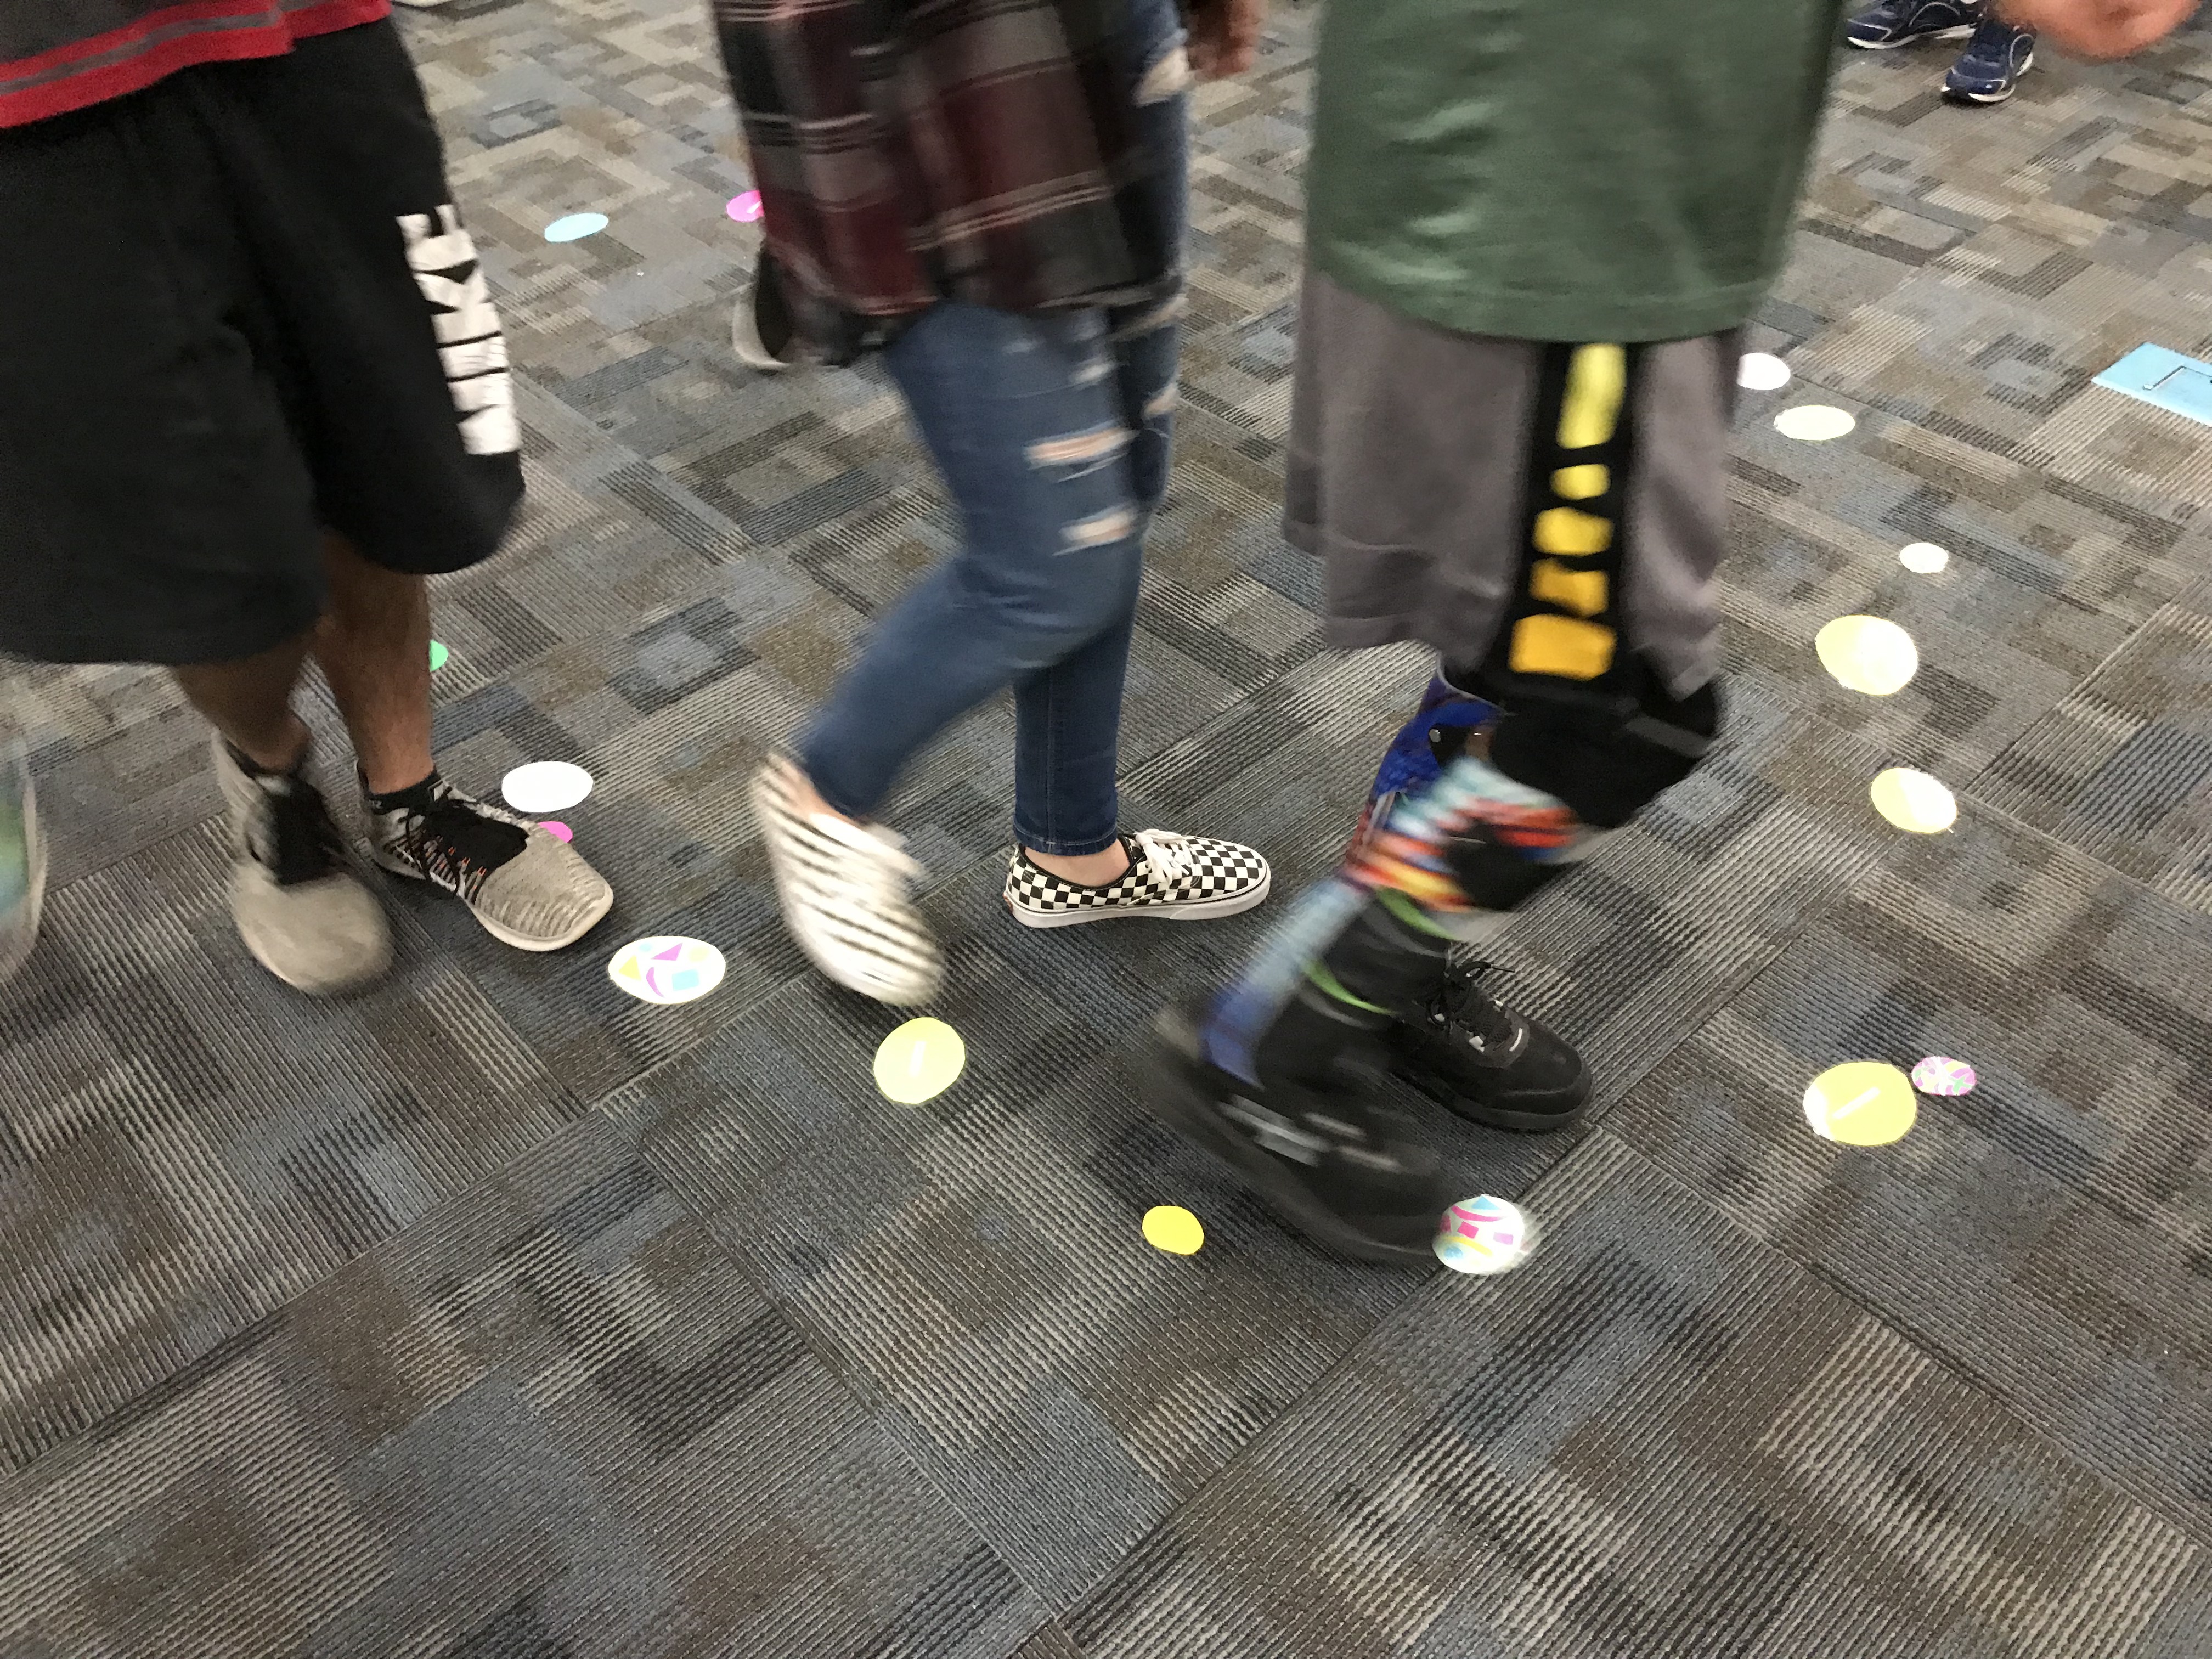 Kids following circles placed on carpet